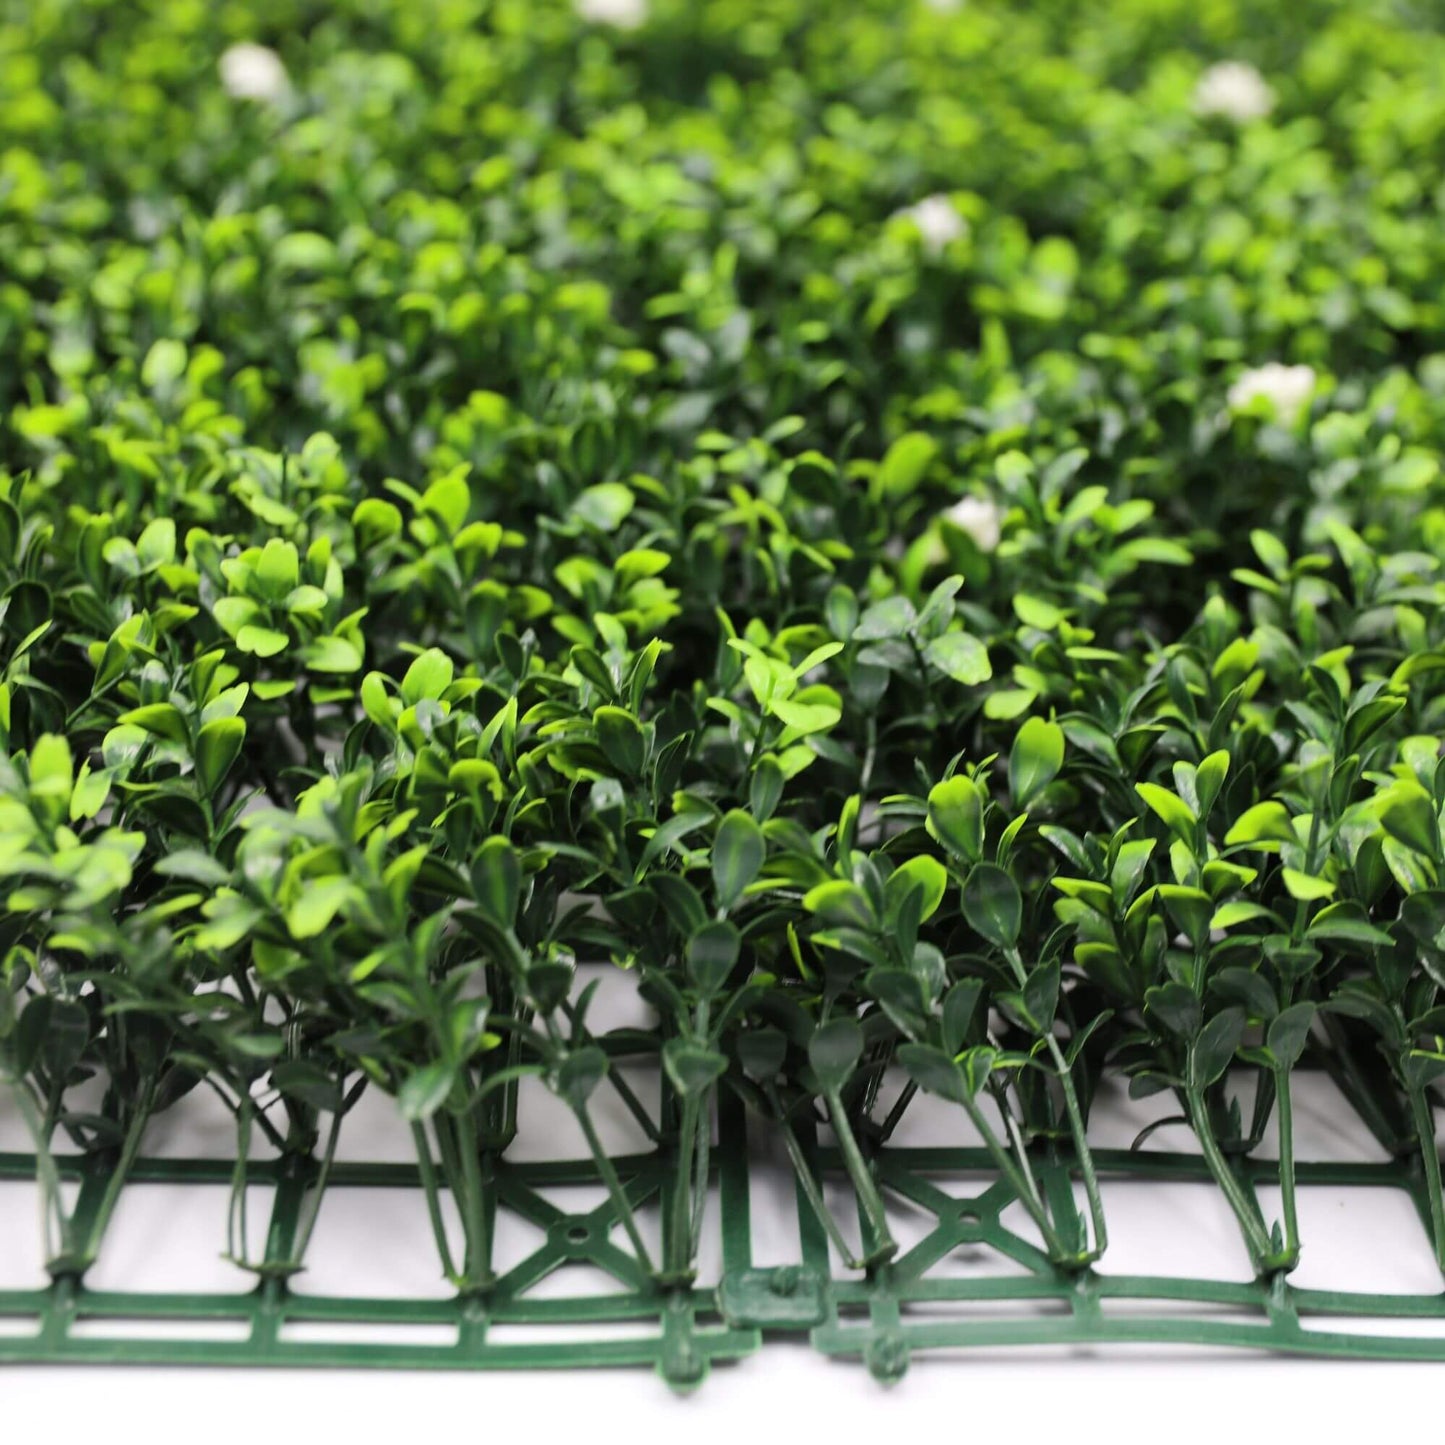 White Flowering Artificial Boxwood Wall 40" x 40" 11SQ FT